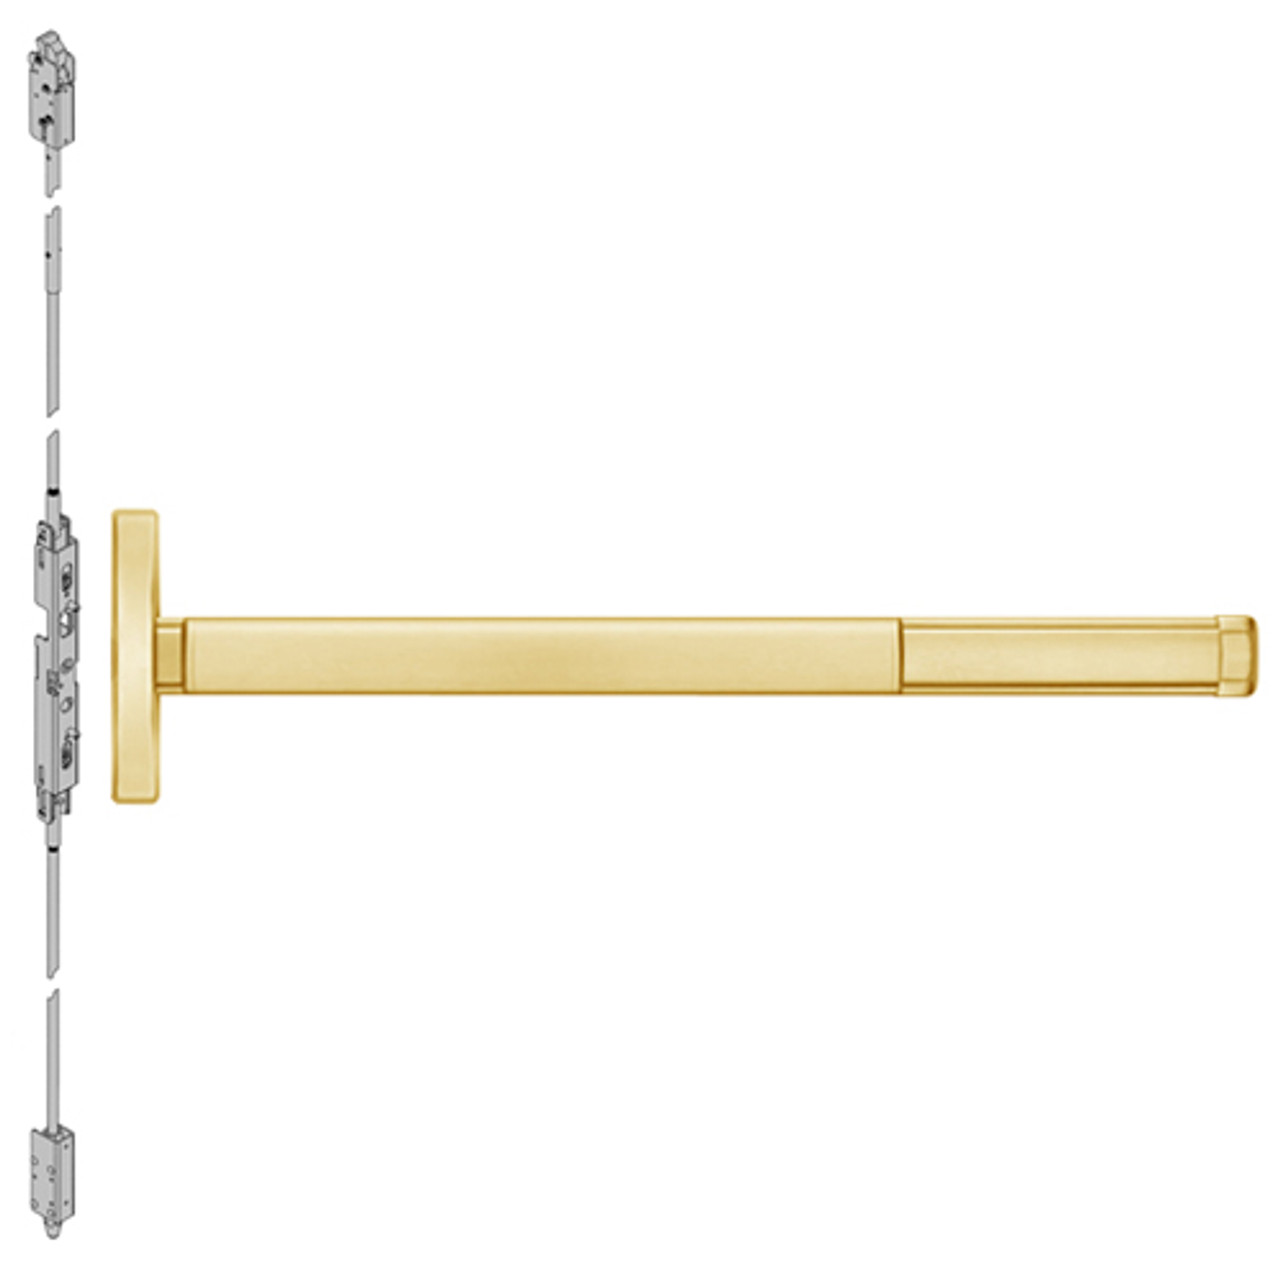 FL2602-605-36 PHI 2600 Series Fire Rated Concealed Vertical Rod Exit Device Prepped for Dummy Trim in Bright Brass Finish